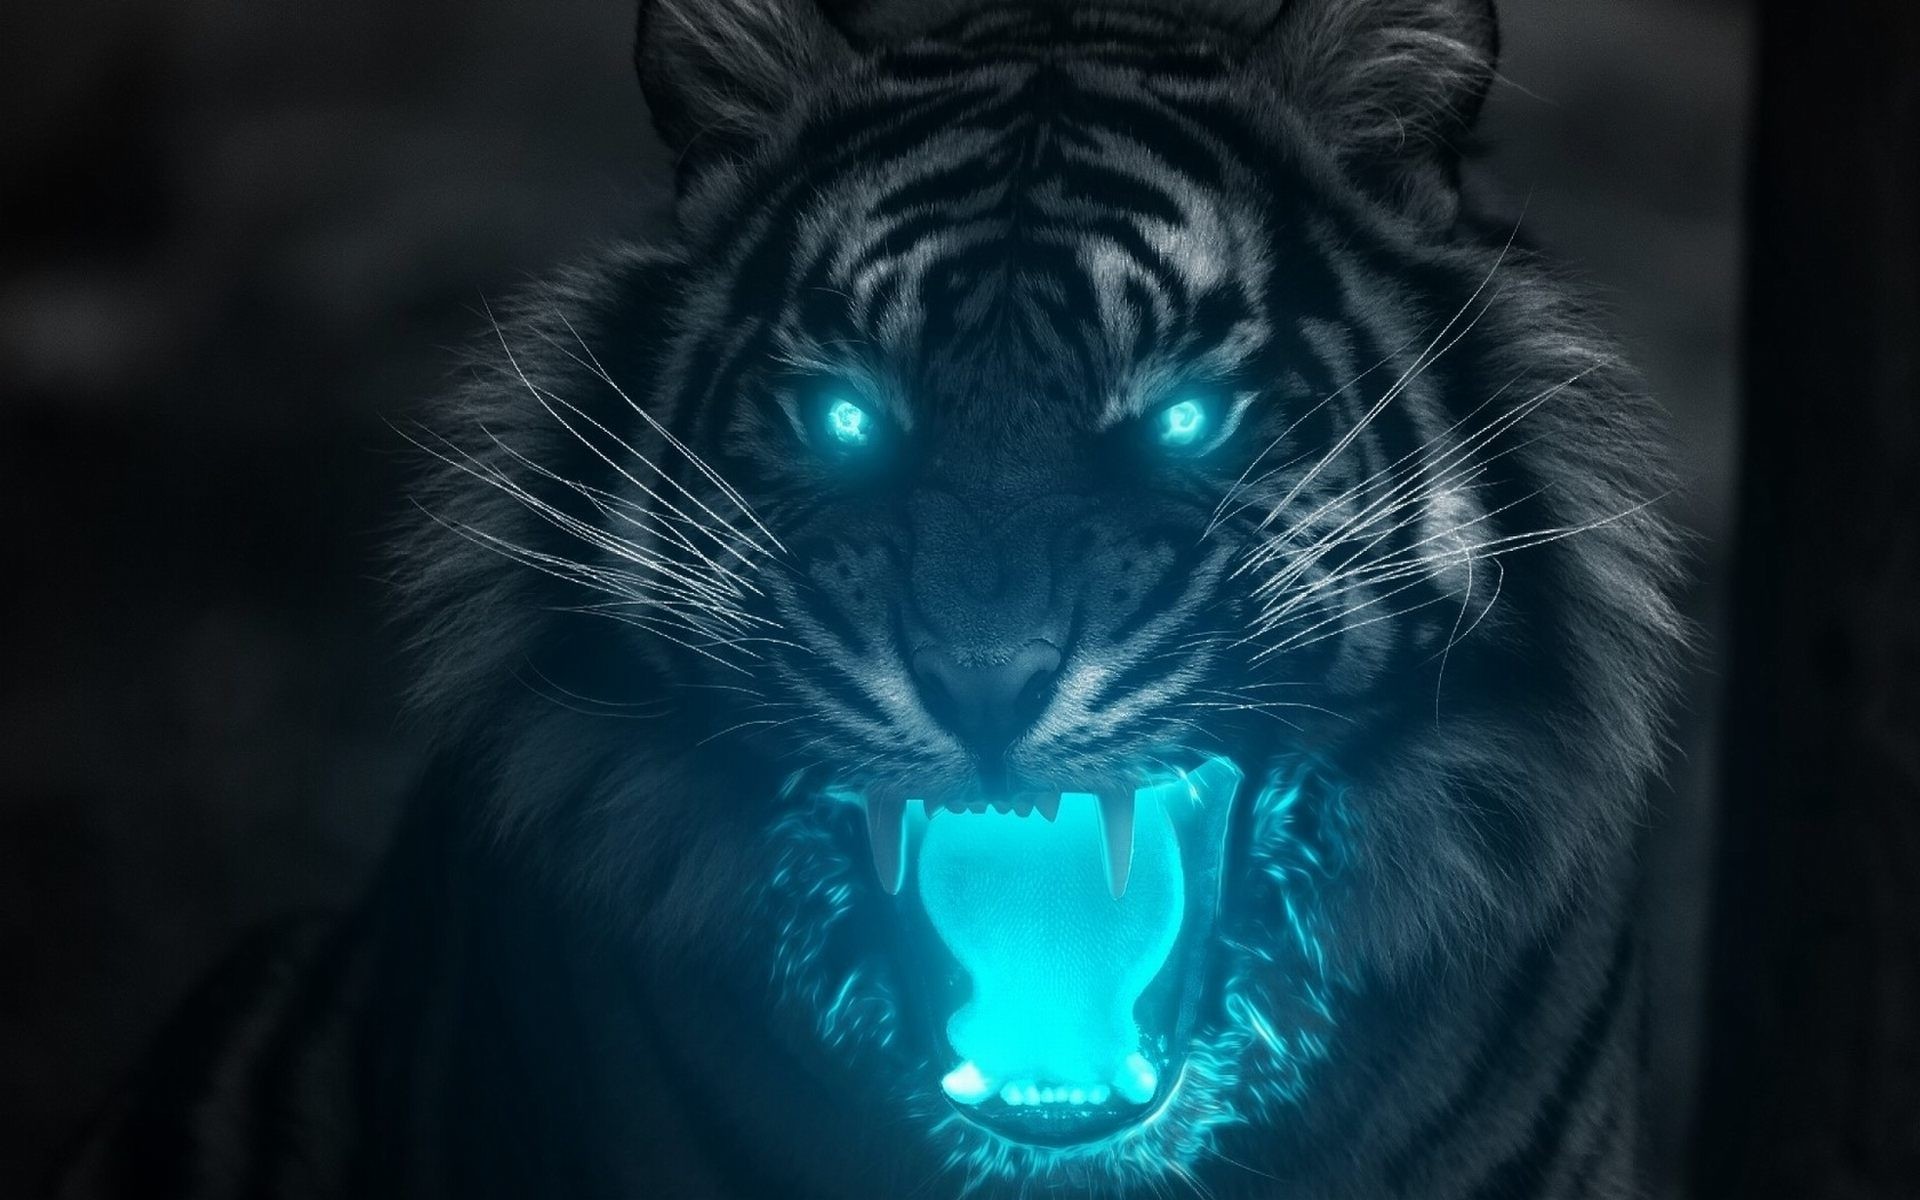 Tiger Wallpapers 65 Pictures